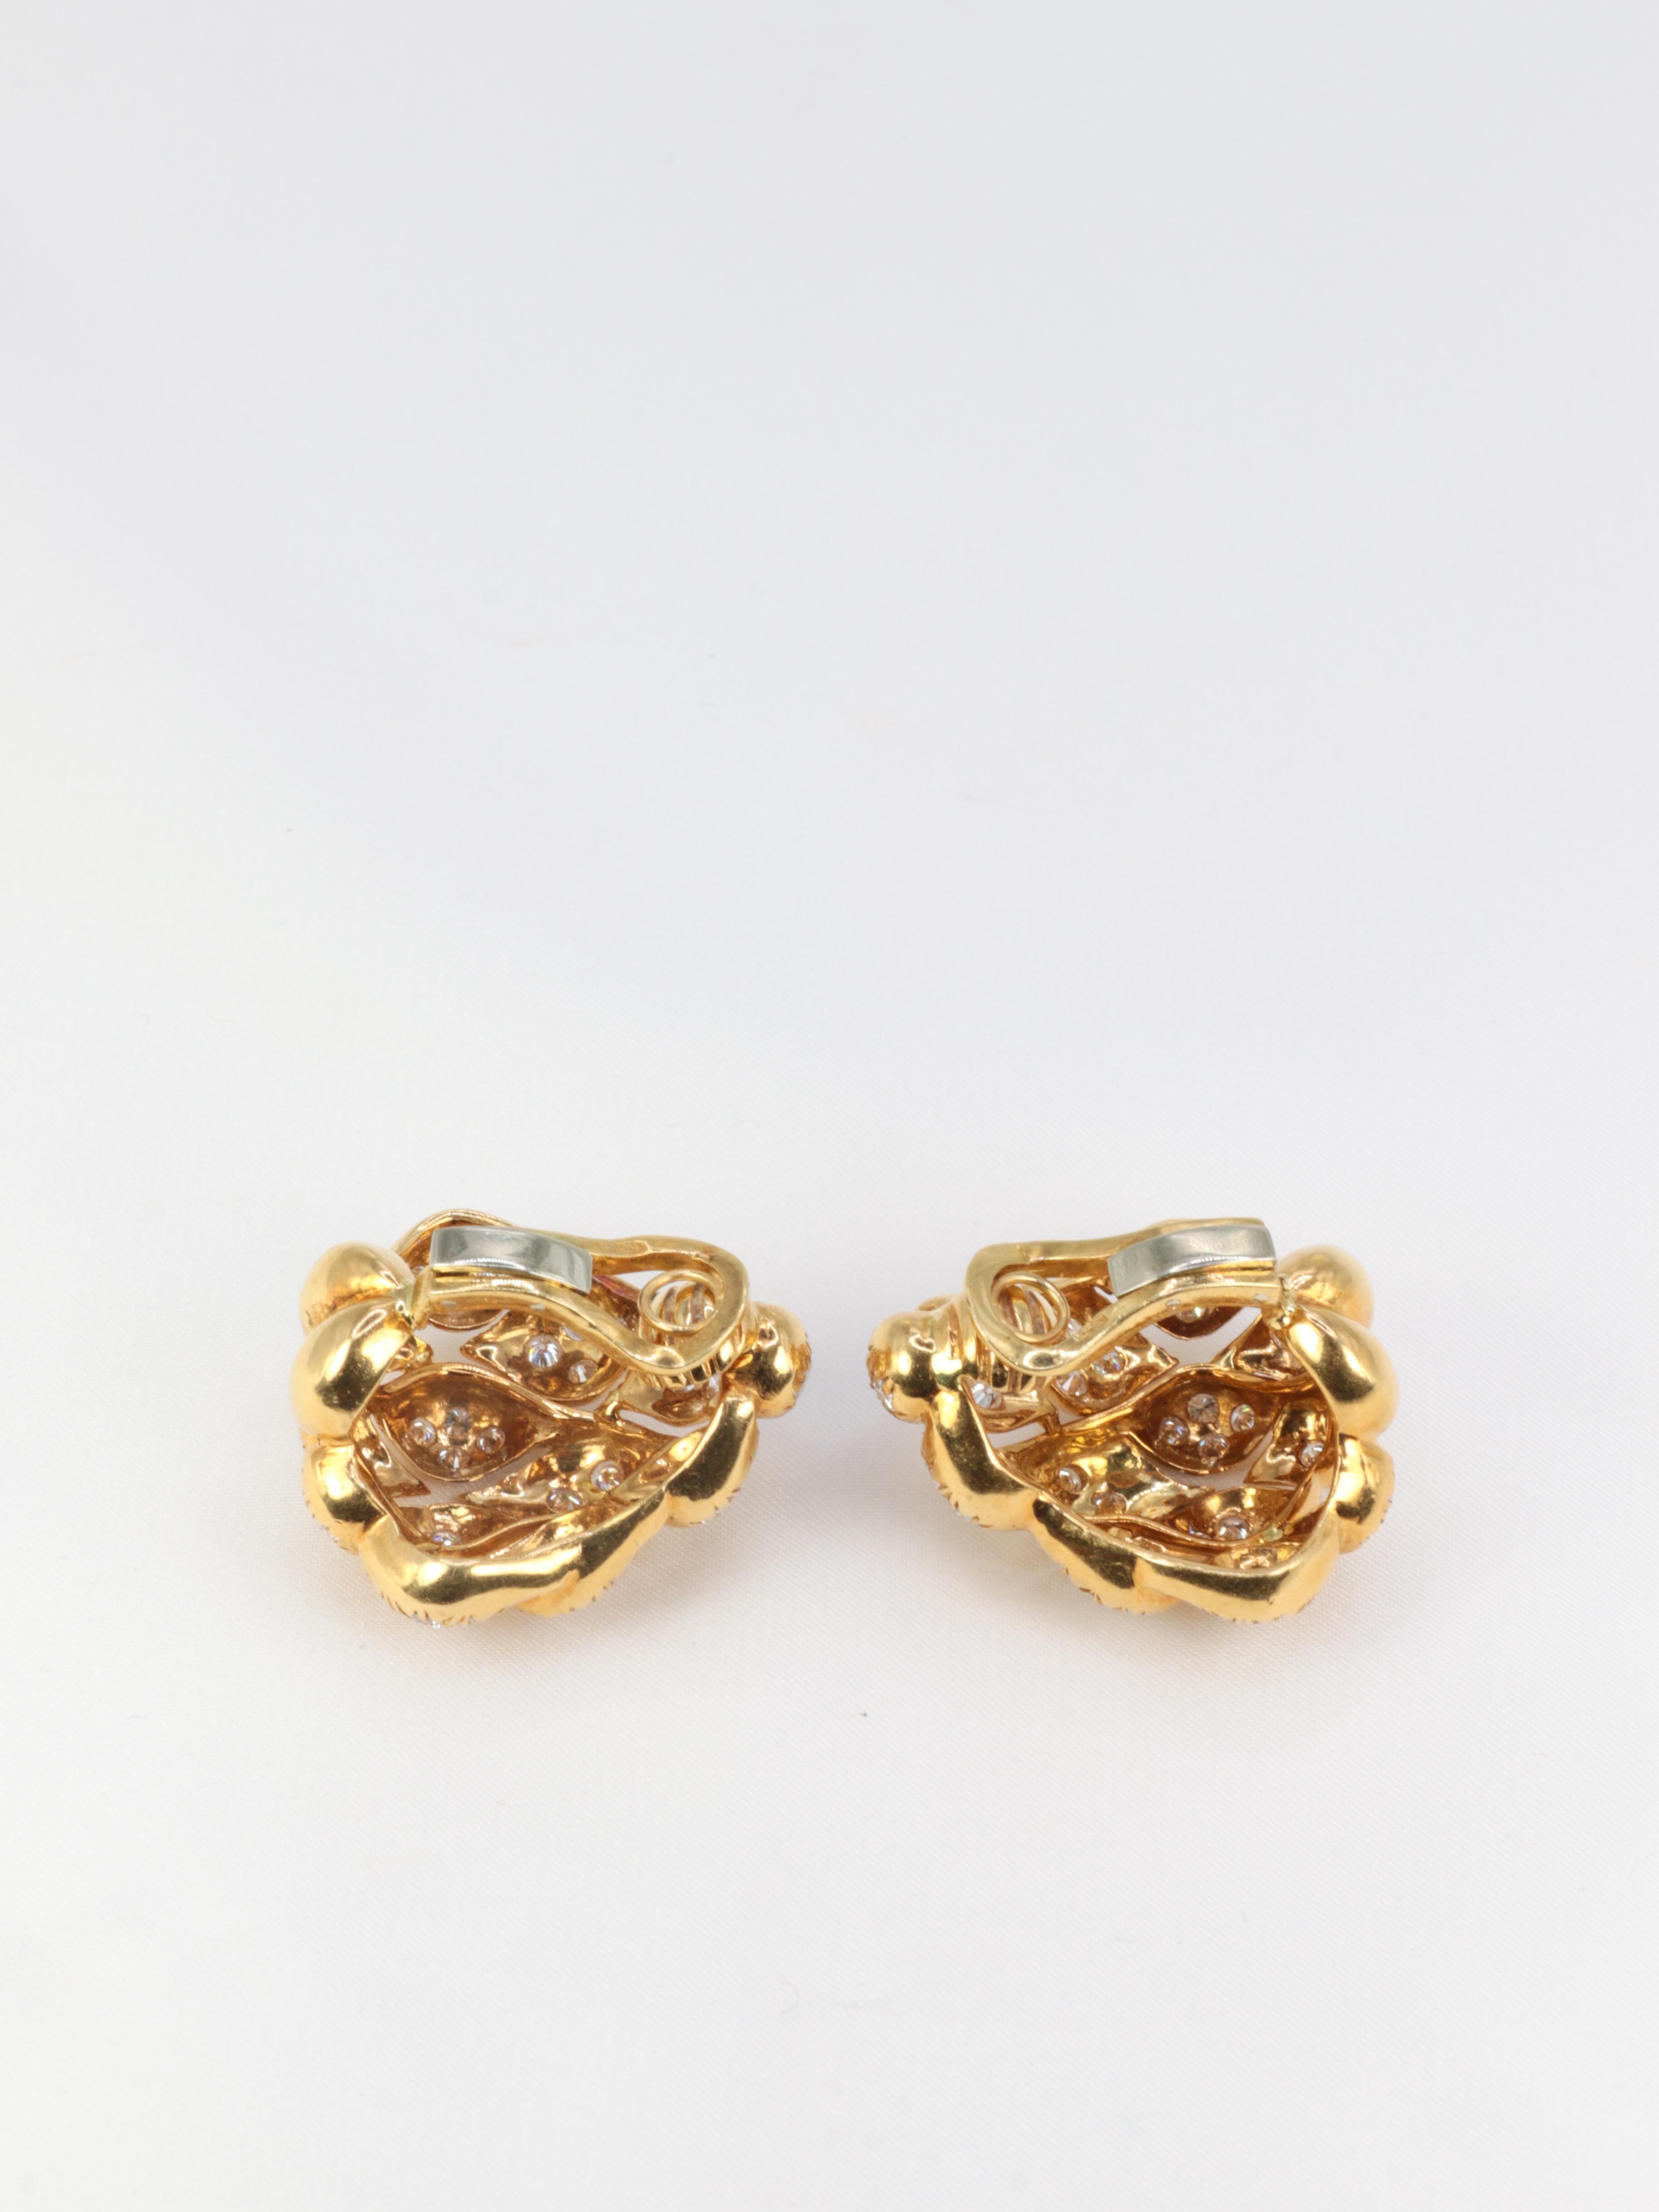 Pair of Gold and Diamond Pinecone Earrings For Sale 3